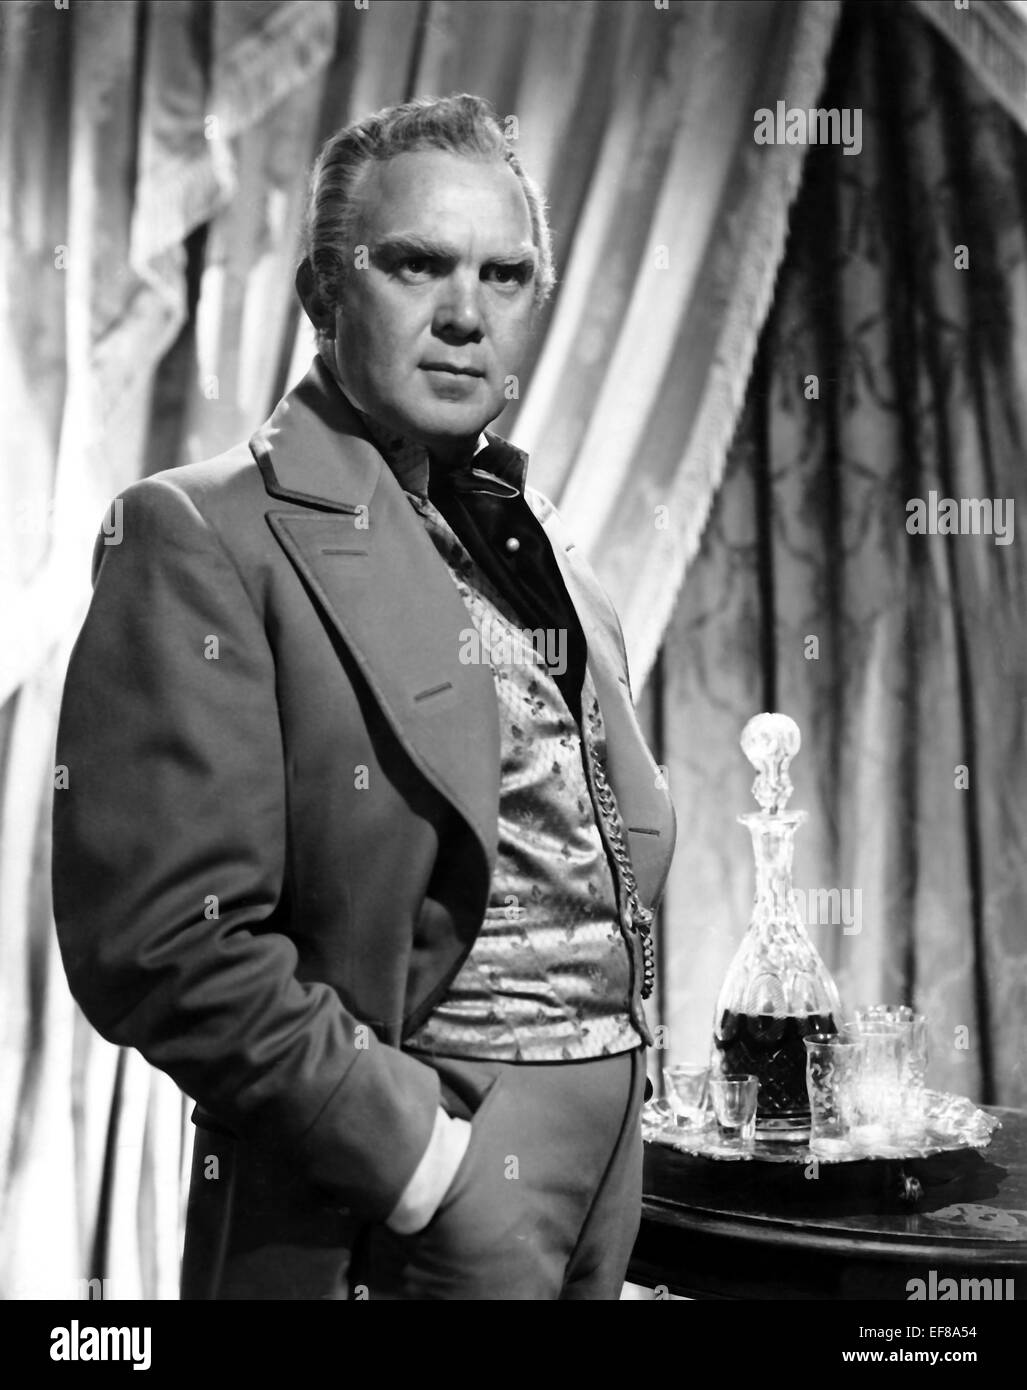 Hollywood HANDSOME ACTOR THOMAS MITCHELL Gone with the Wind 1939 ORIG Photo  583